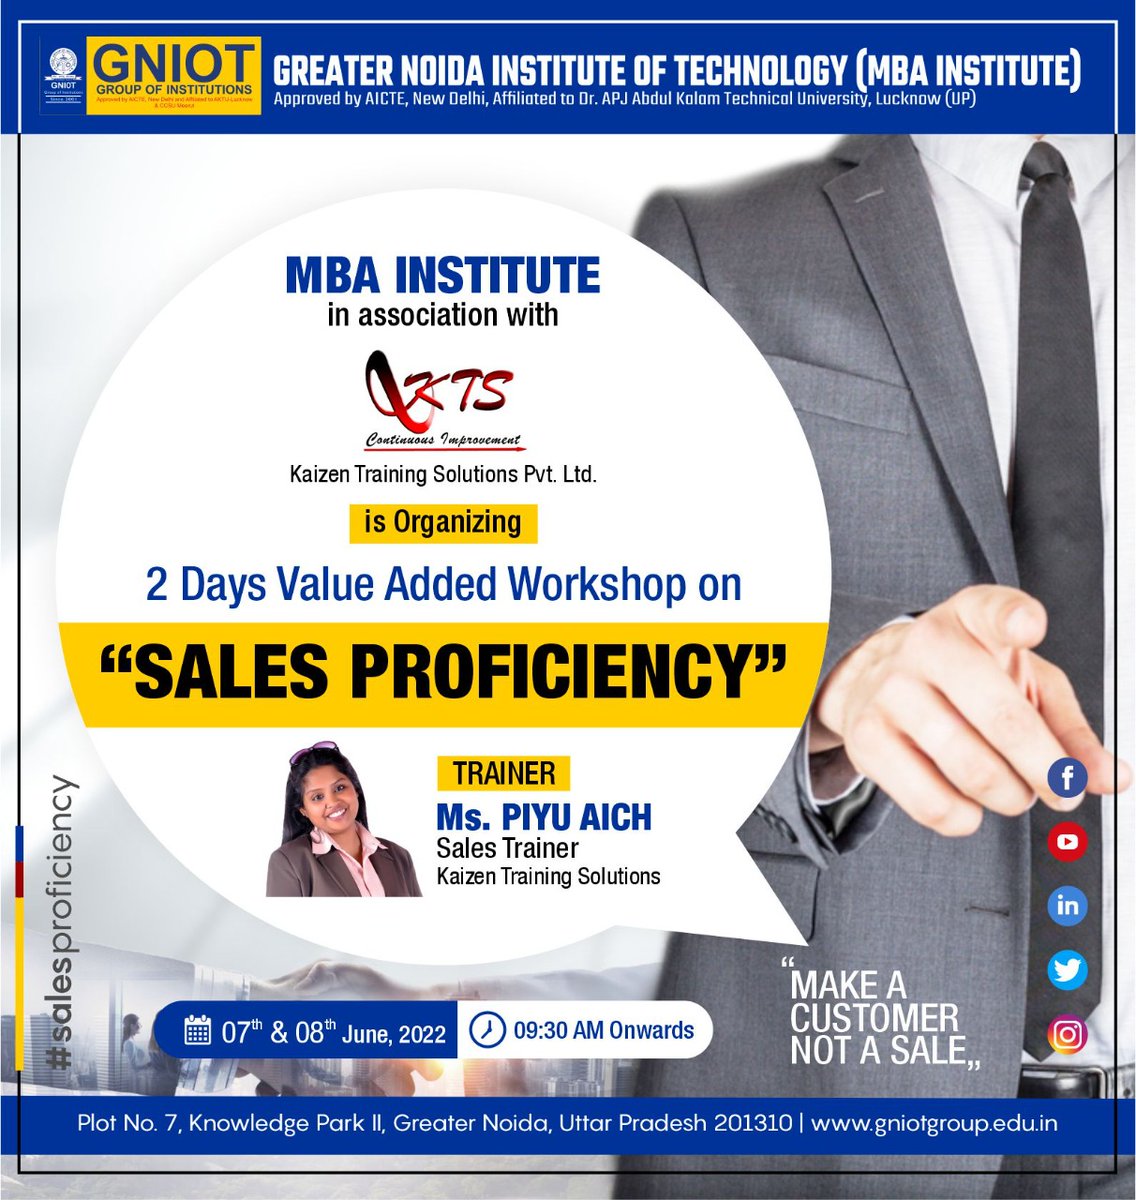 GNIOT MBA Institute is organizing a two days Value Added Workshop on 'SALES PROFICIENCY' for MBA Students.

Visit our Website: gniotmba.net
Toll Free No.: 18002746969

#MBA #GNIOTMBA #GNIOT  #College #Institute #GNIOTCollege #SalesProficiency #KaizenTrainingSolution